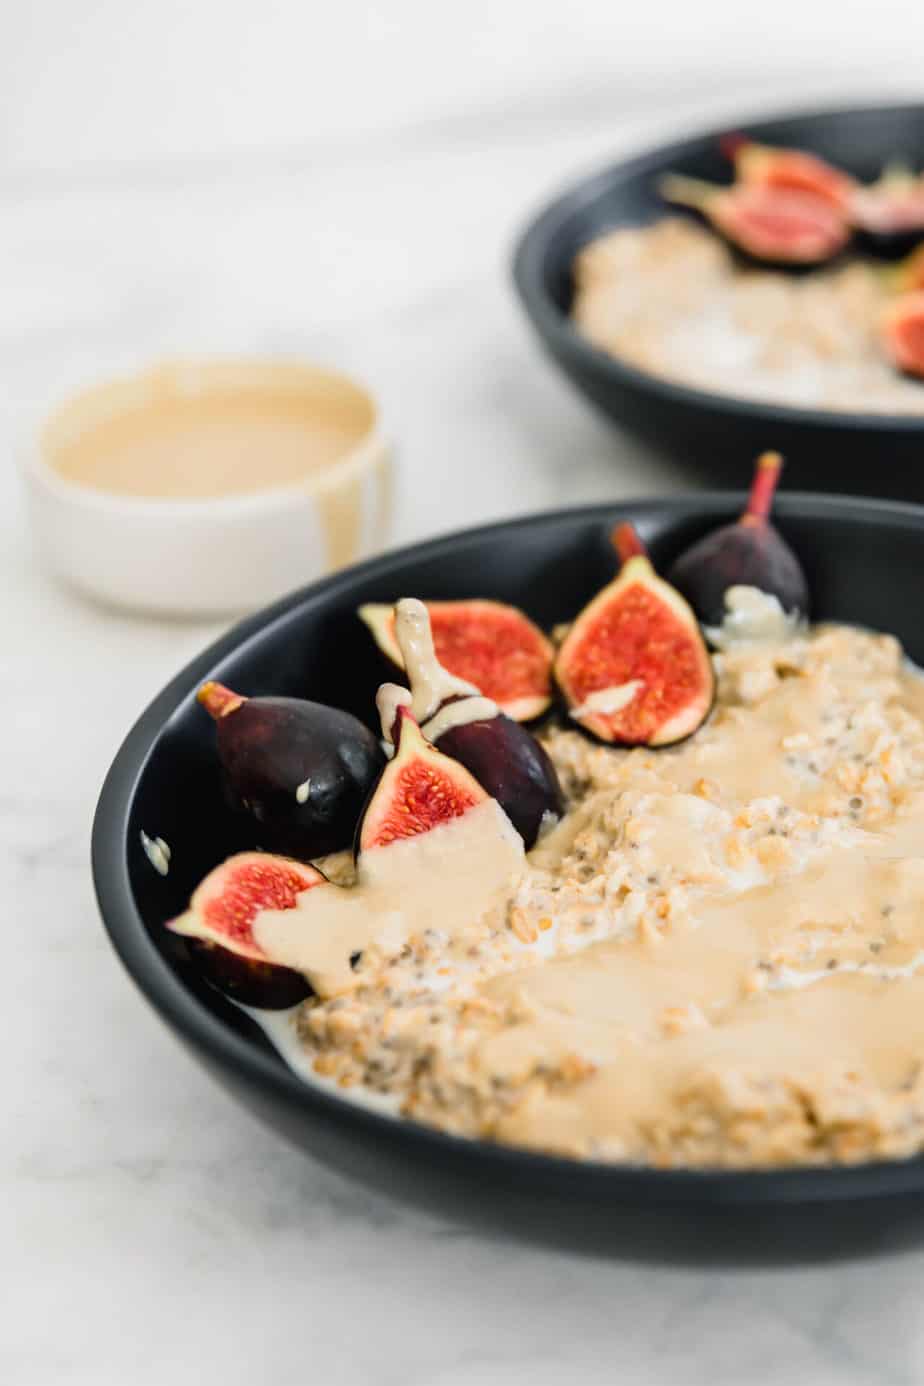 Figs on top of oatmeal in a black bowl.